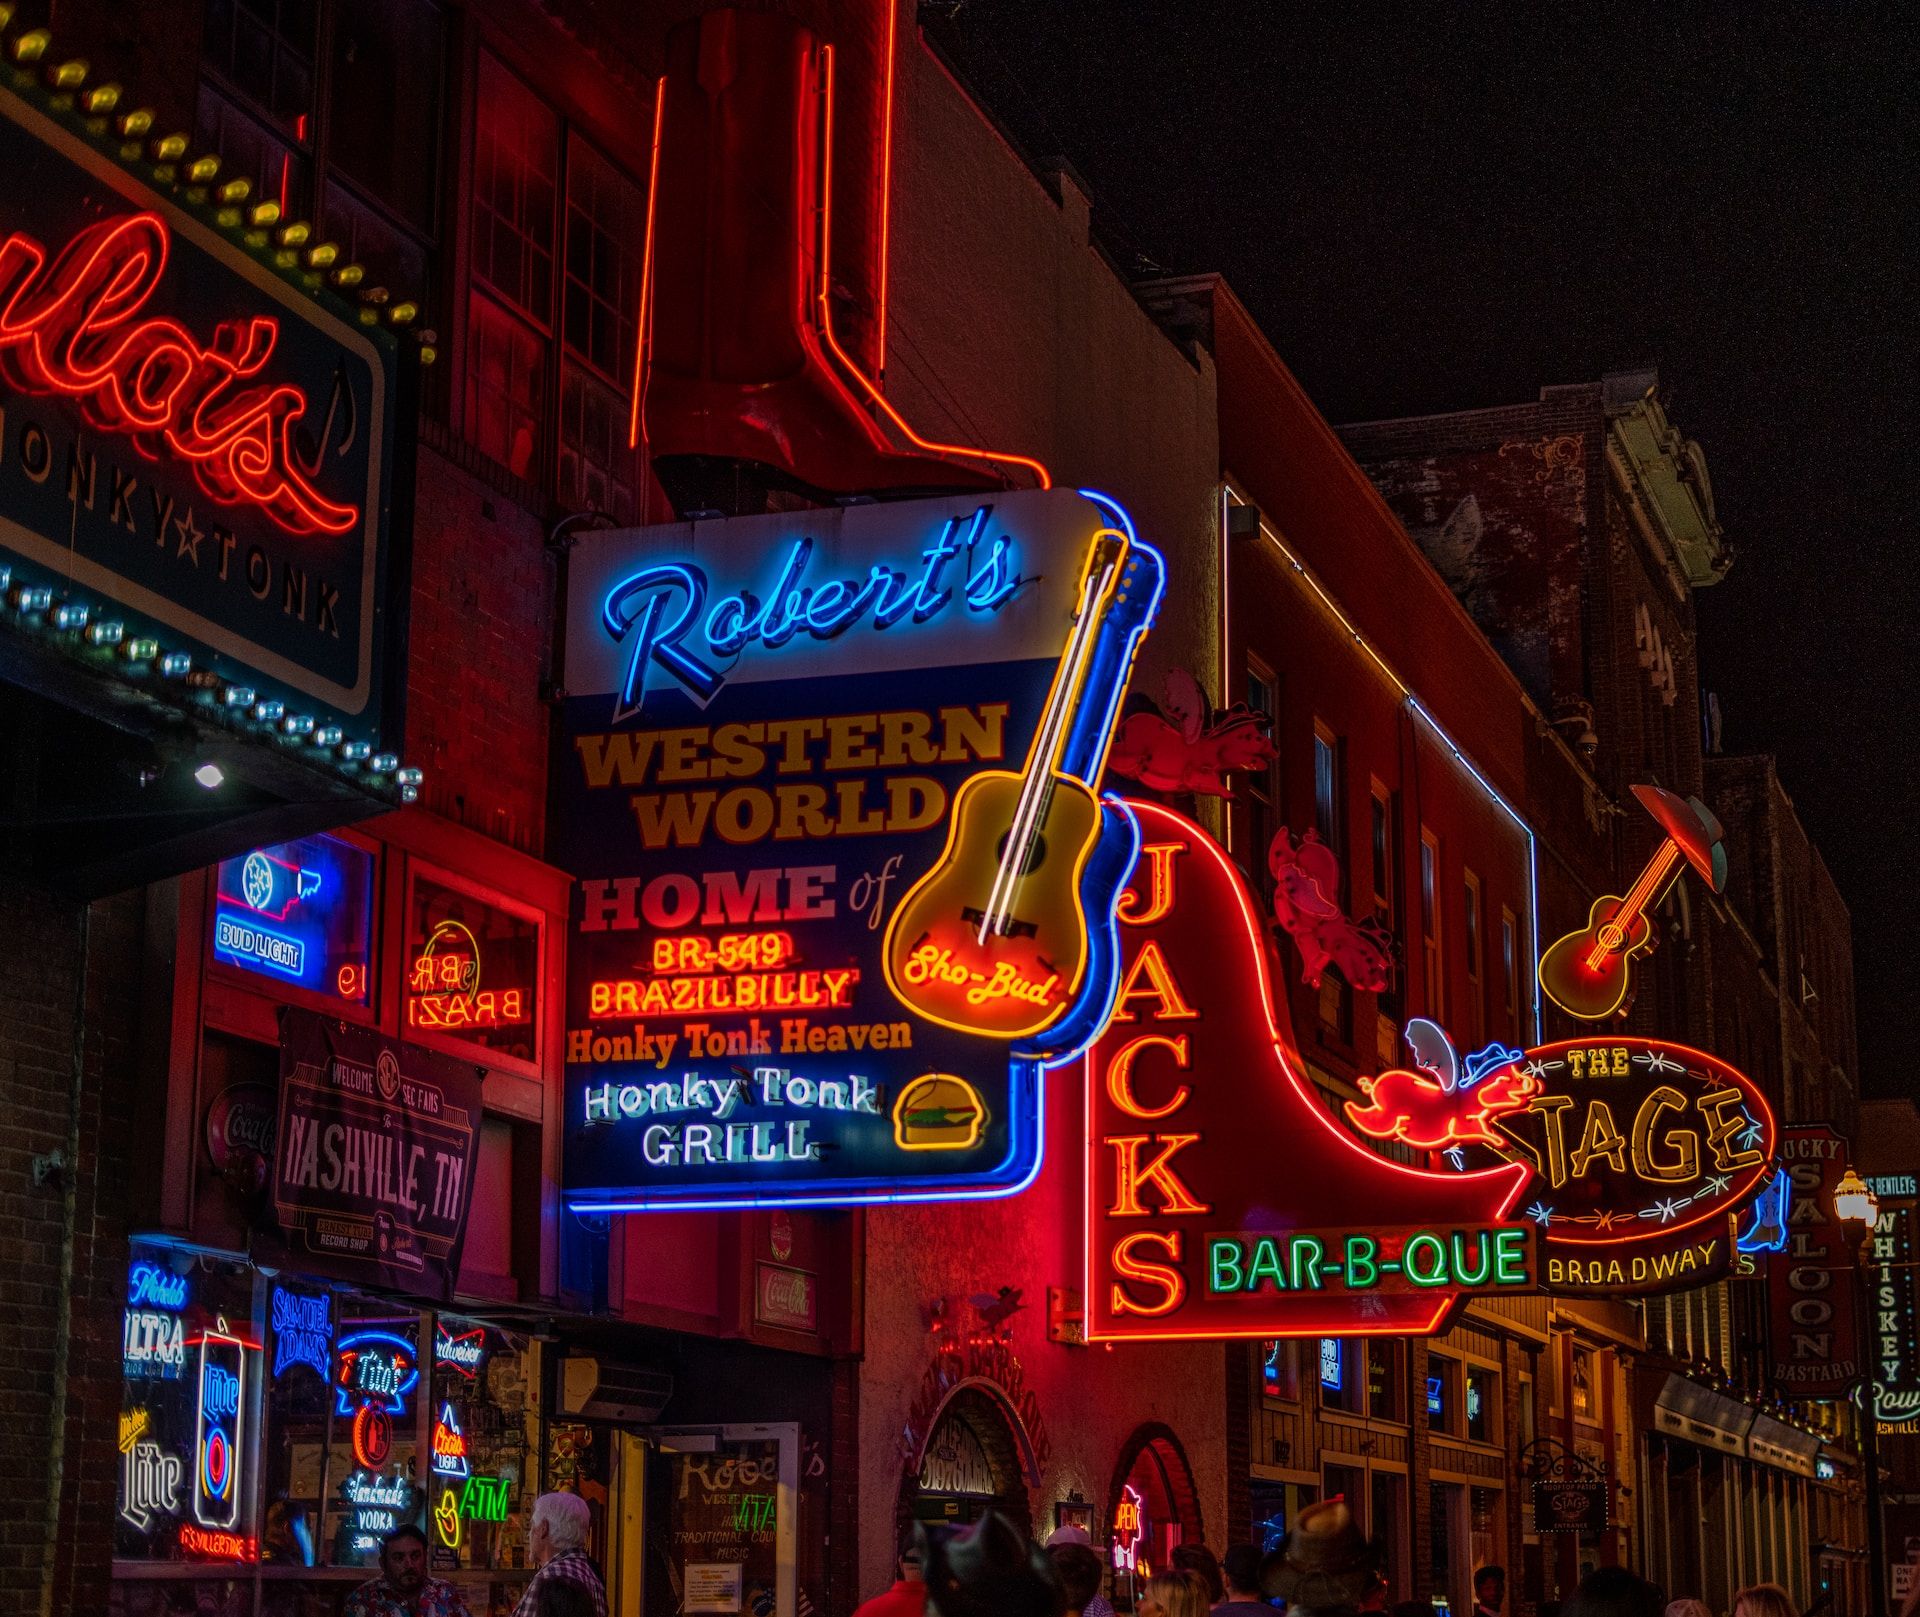 Neon signage in downtown Nashville, TN at night